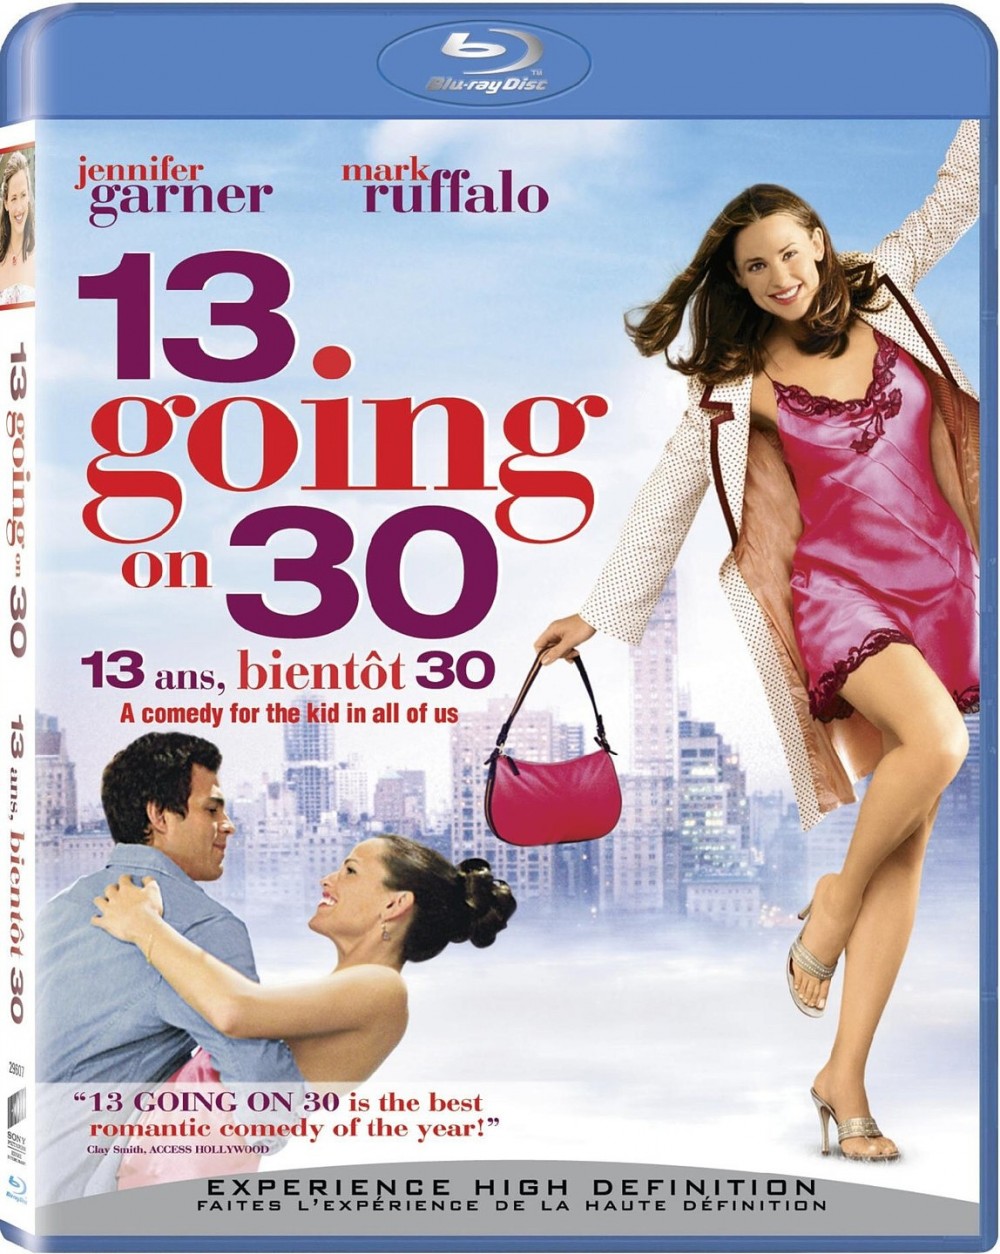 13.going.on.30.2004.bluray.front.cover.us.jpg